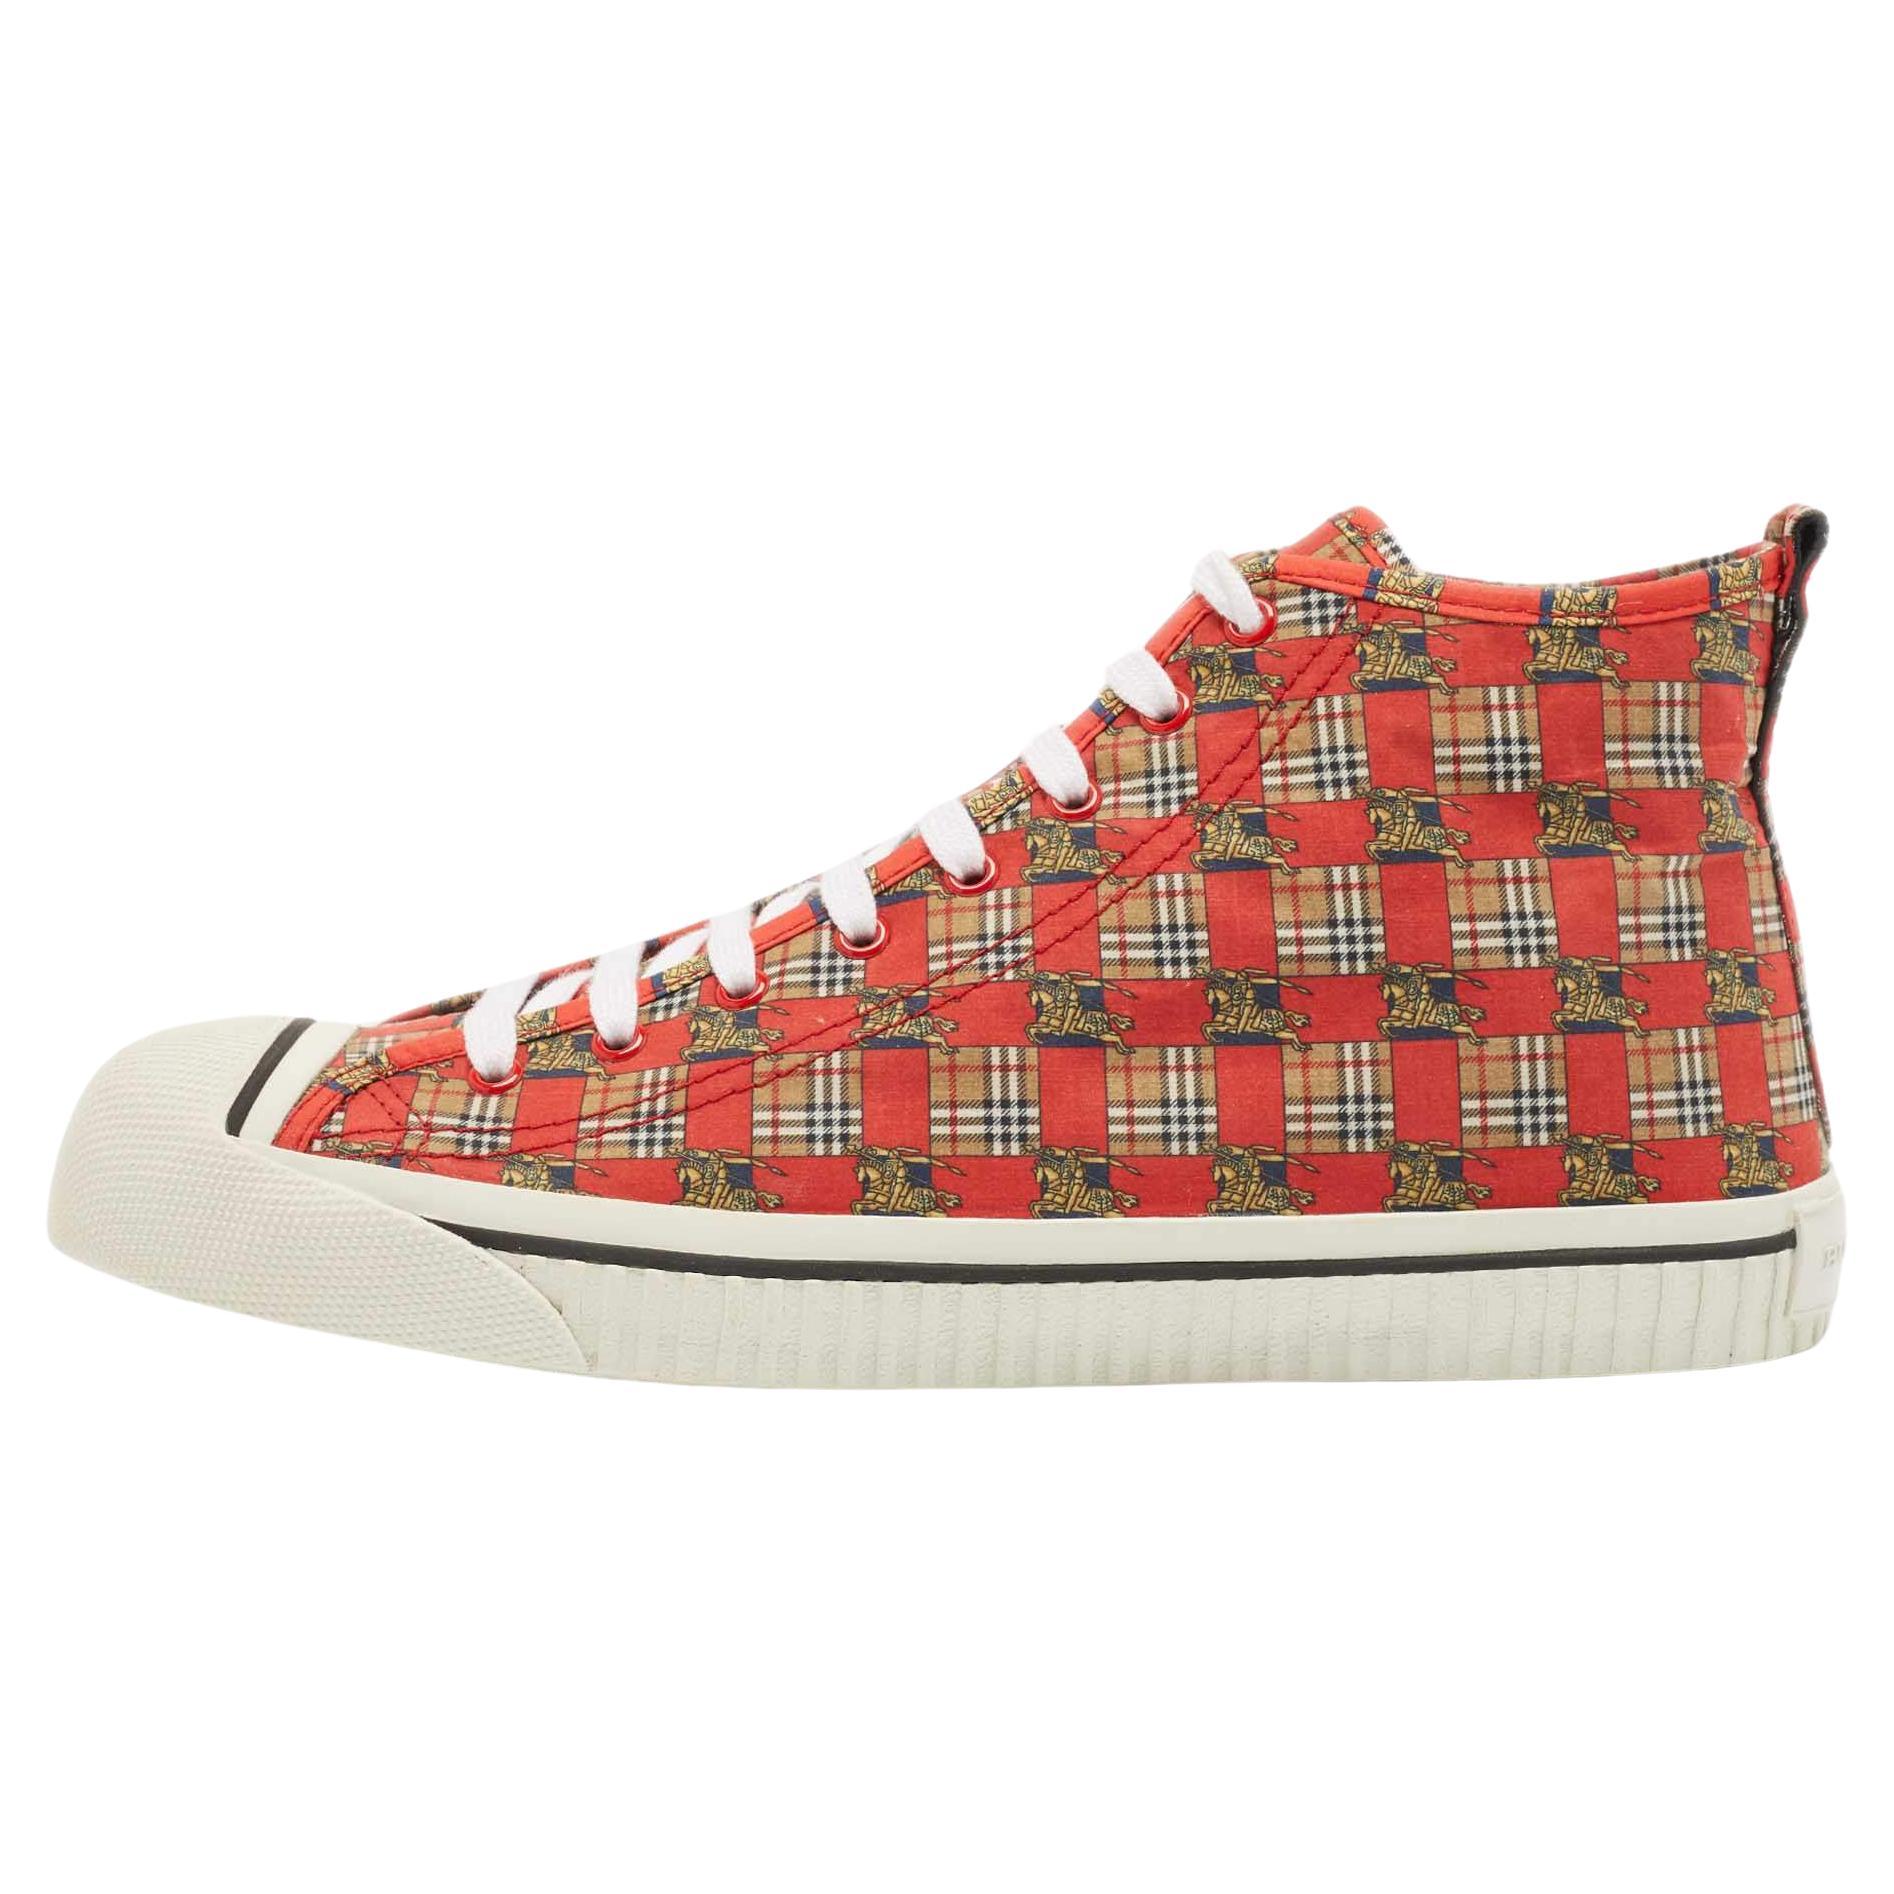 Burberry Red/Beige Canvas Kingly Print High Top Sneakers Size 45